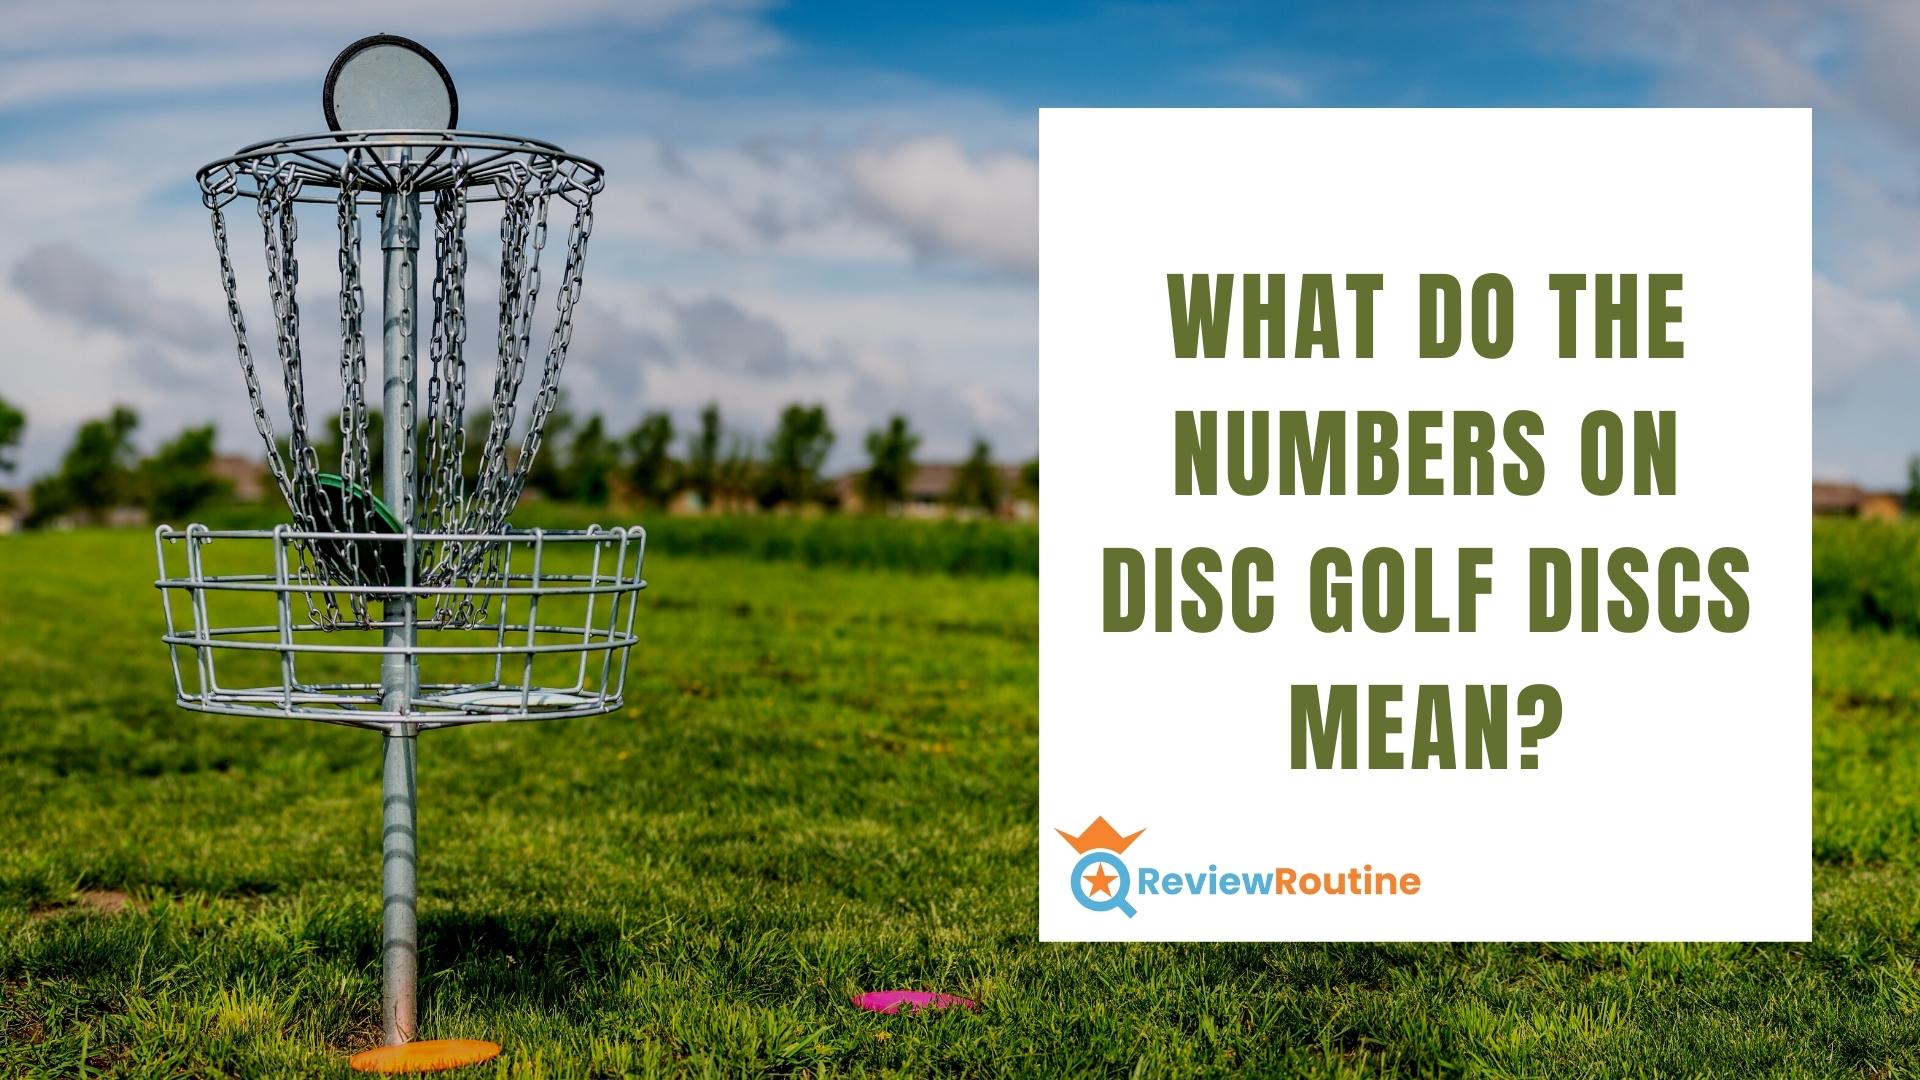 What Do the Numbers on Disc Golf Discs Mean?